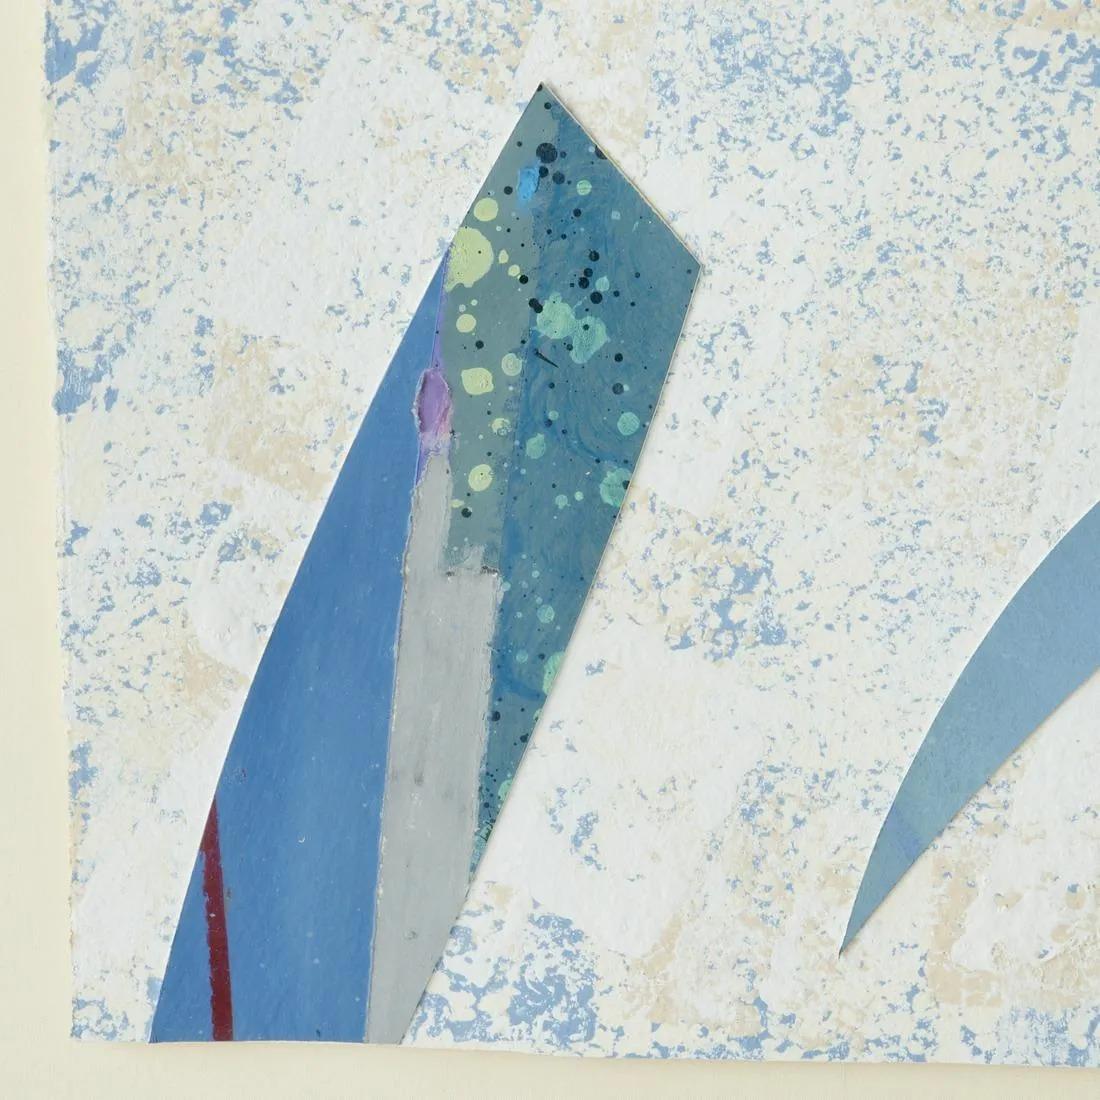 A mixed media collage in blues, framed and signed by Edward Meneeley, 1983. The contemporary artwork mixes paper and paint in varied shades of blue with an open curved and angular abstract design. The artwork is signed, matted and sits in a gold